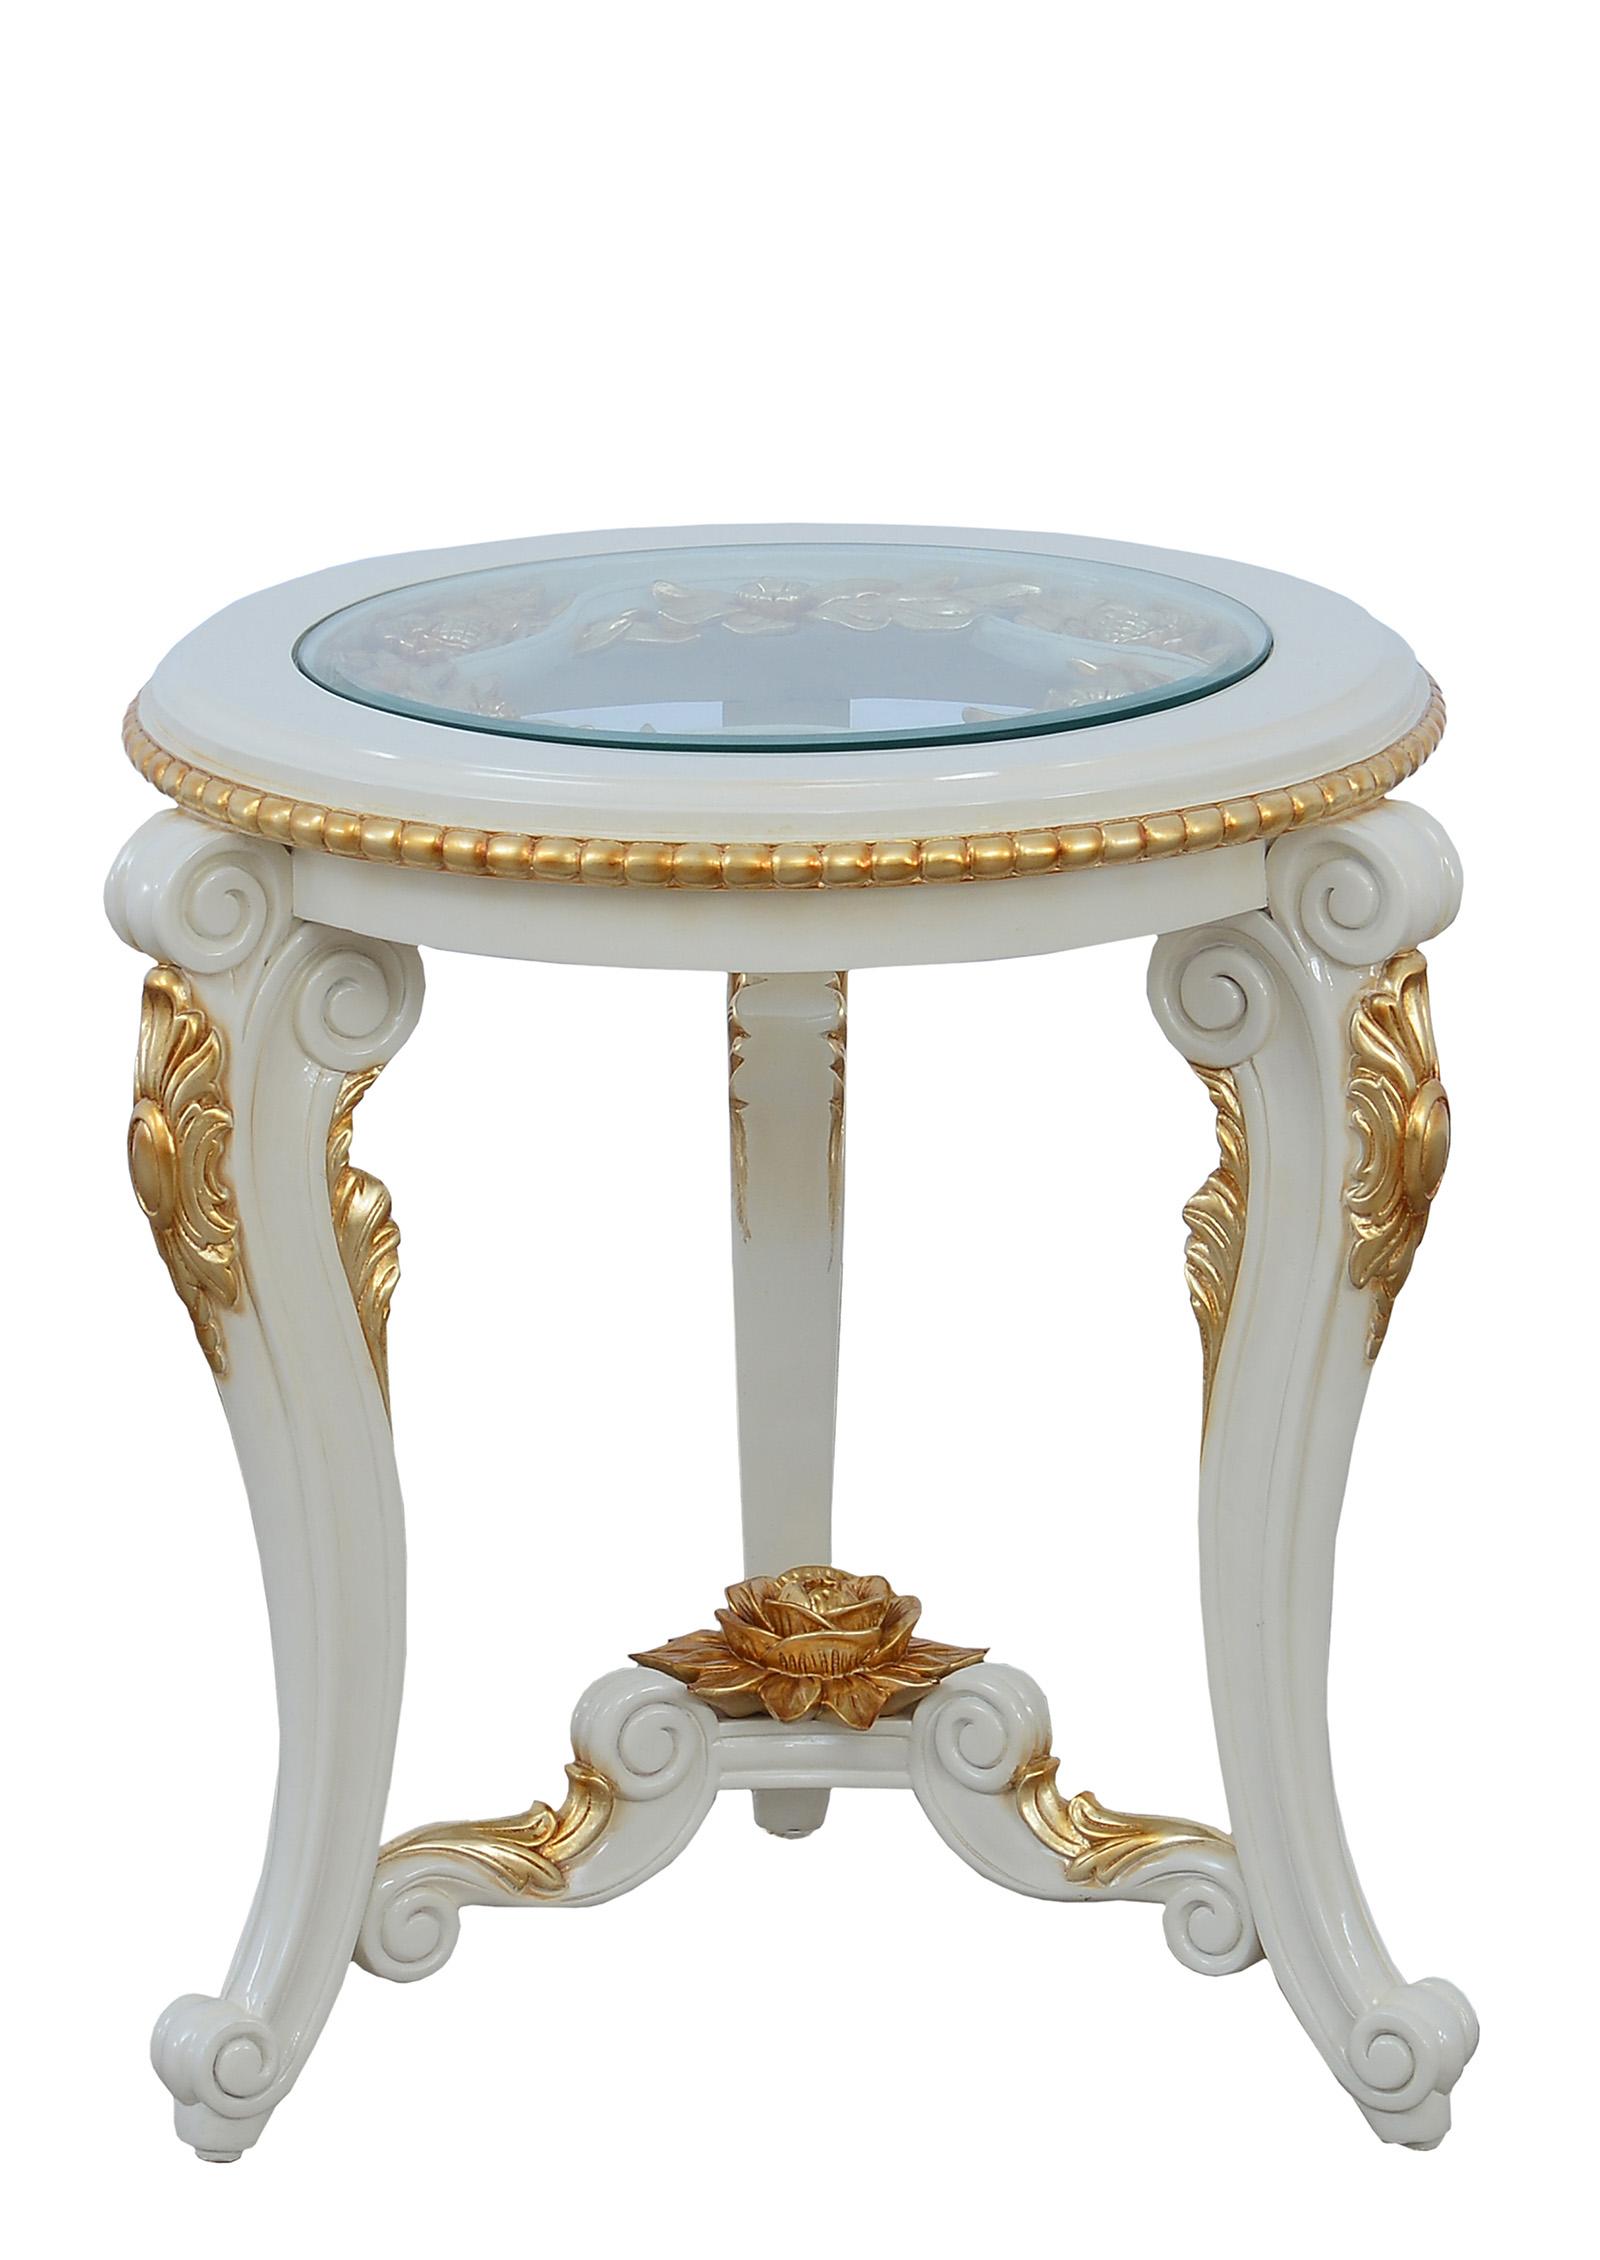 Classic, Traditional End Table BELLAGIO 30017-ET in Antique, Gold, Beige 